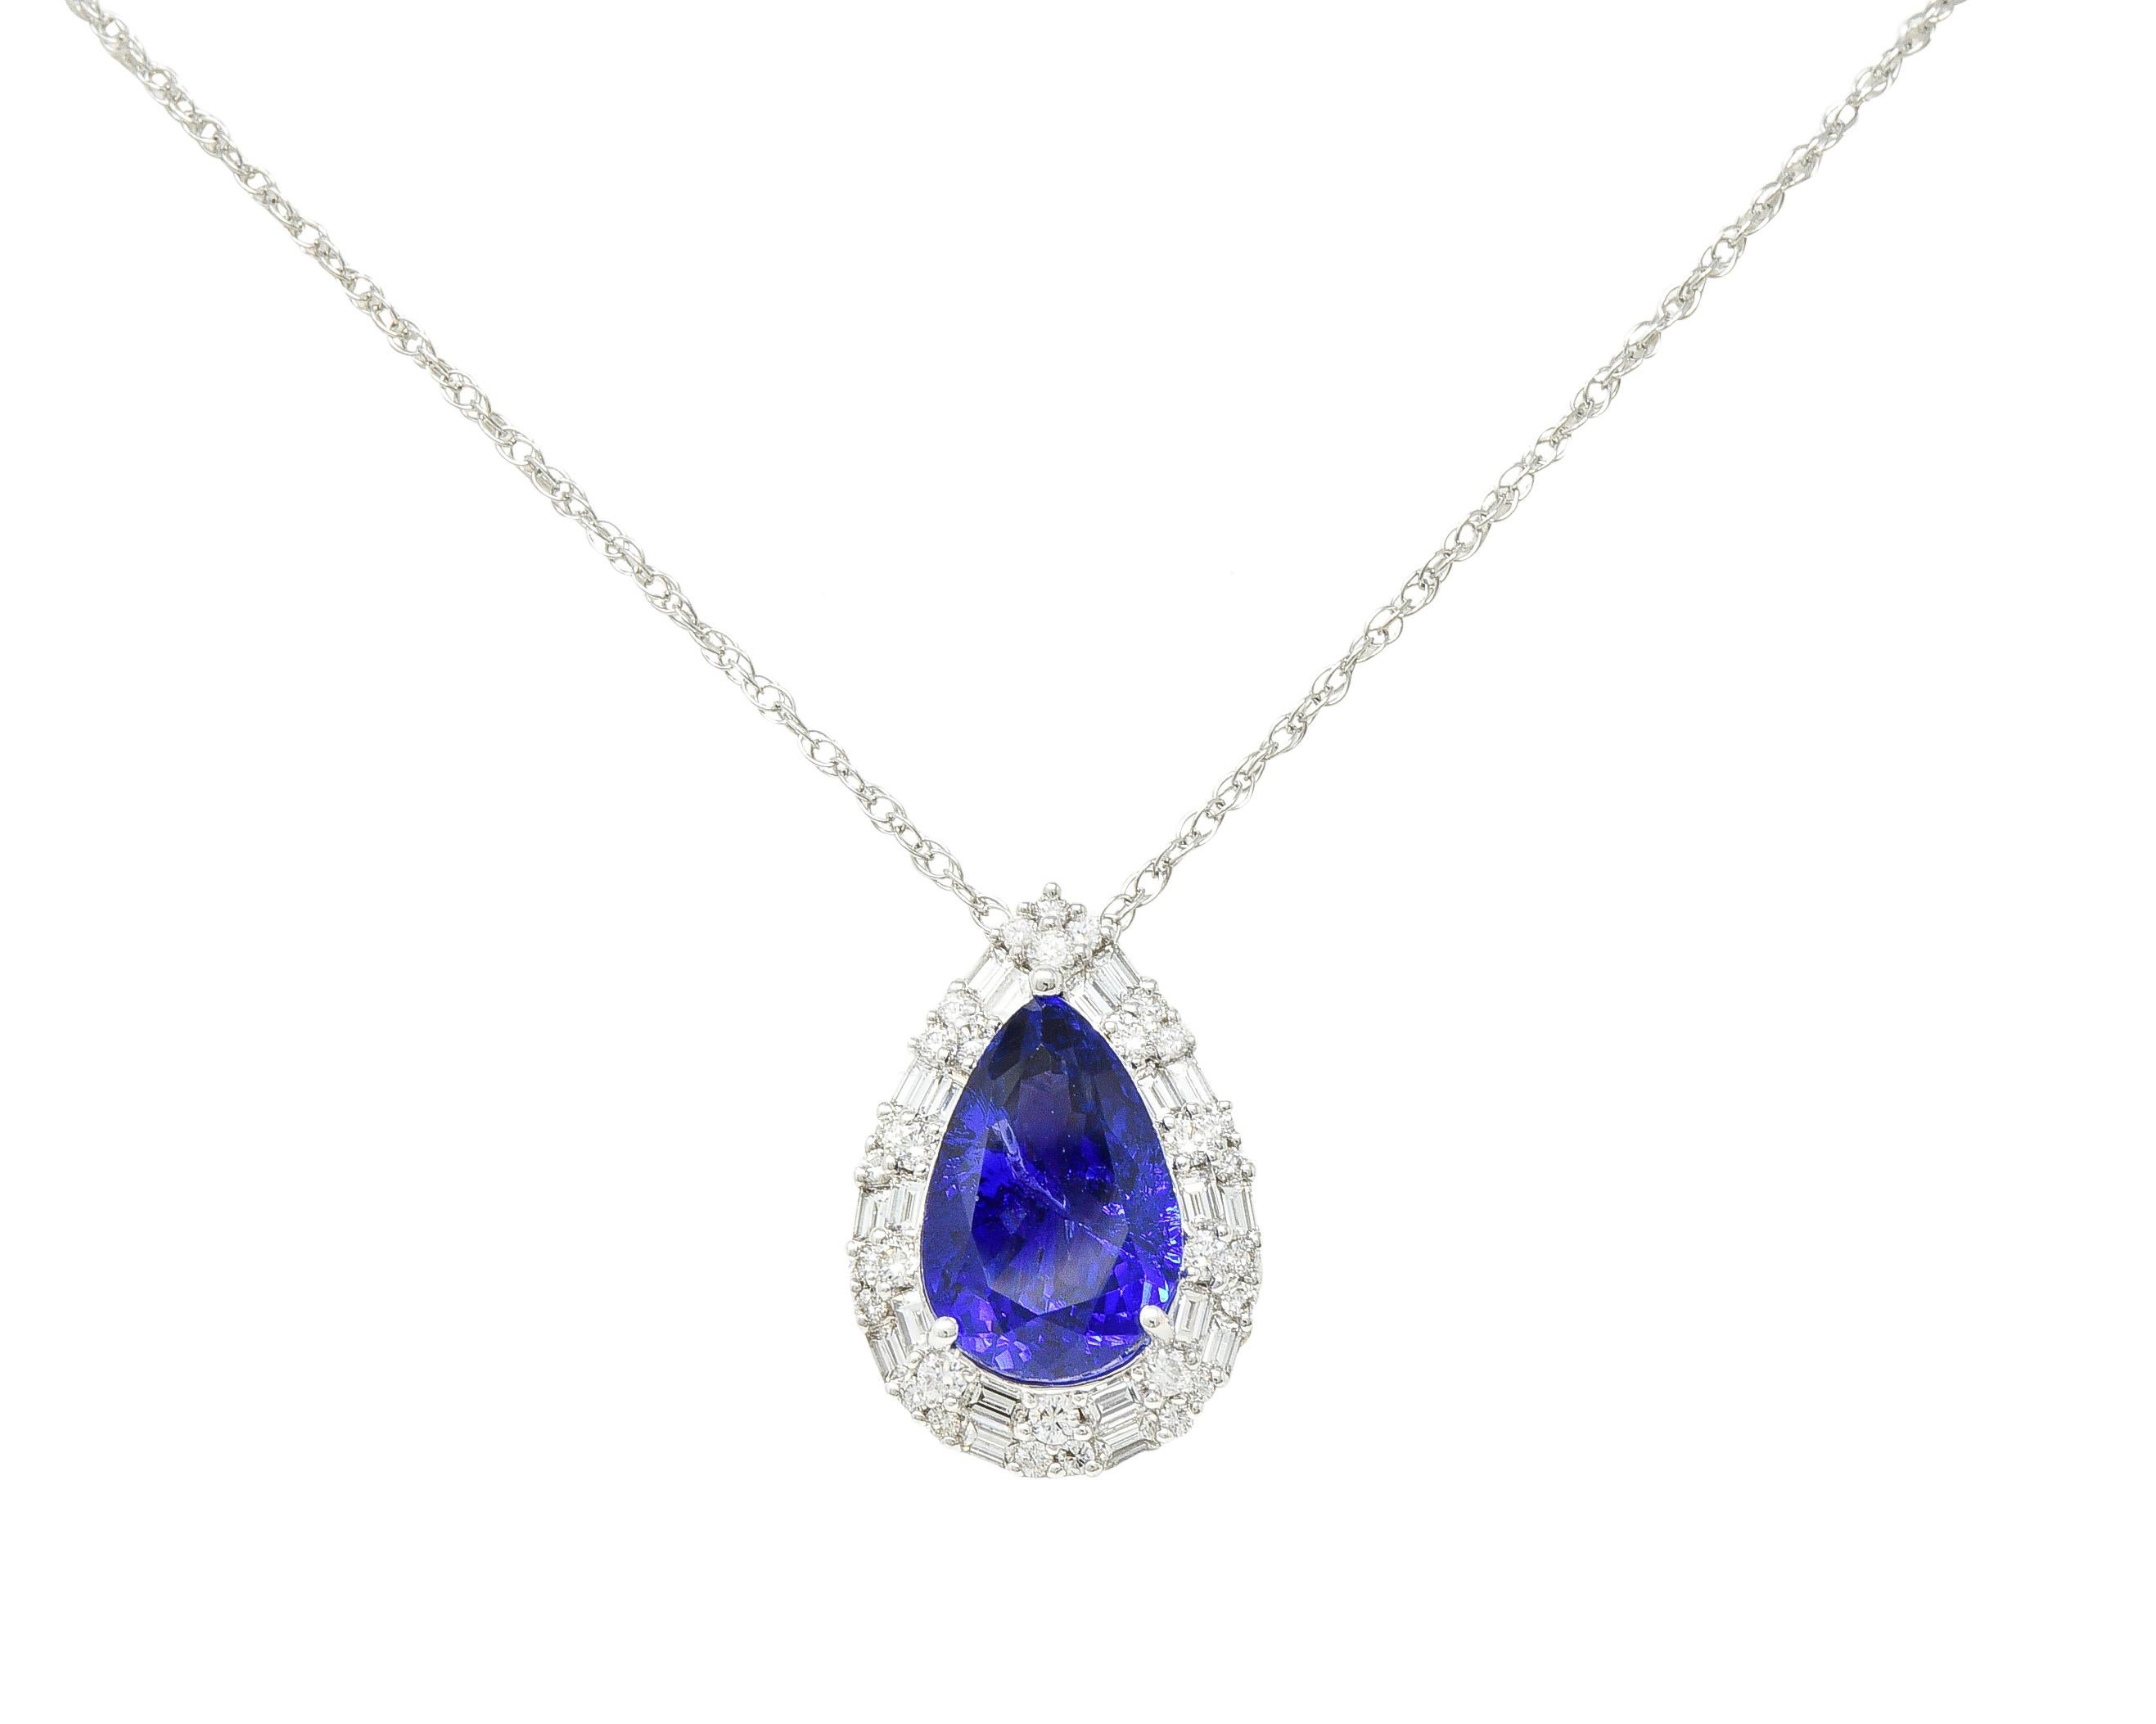 Centering a pear cut tanzanite weighing 11.57 carats total - prong set. Semi-transparent violetish-blue with natural inclusions. With a double halo surround and cathedral shoulders. Accented by round brilliant and baguette cut diamonds. Weighing